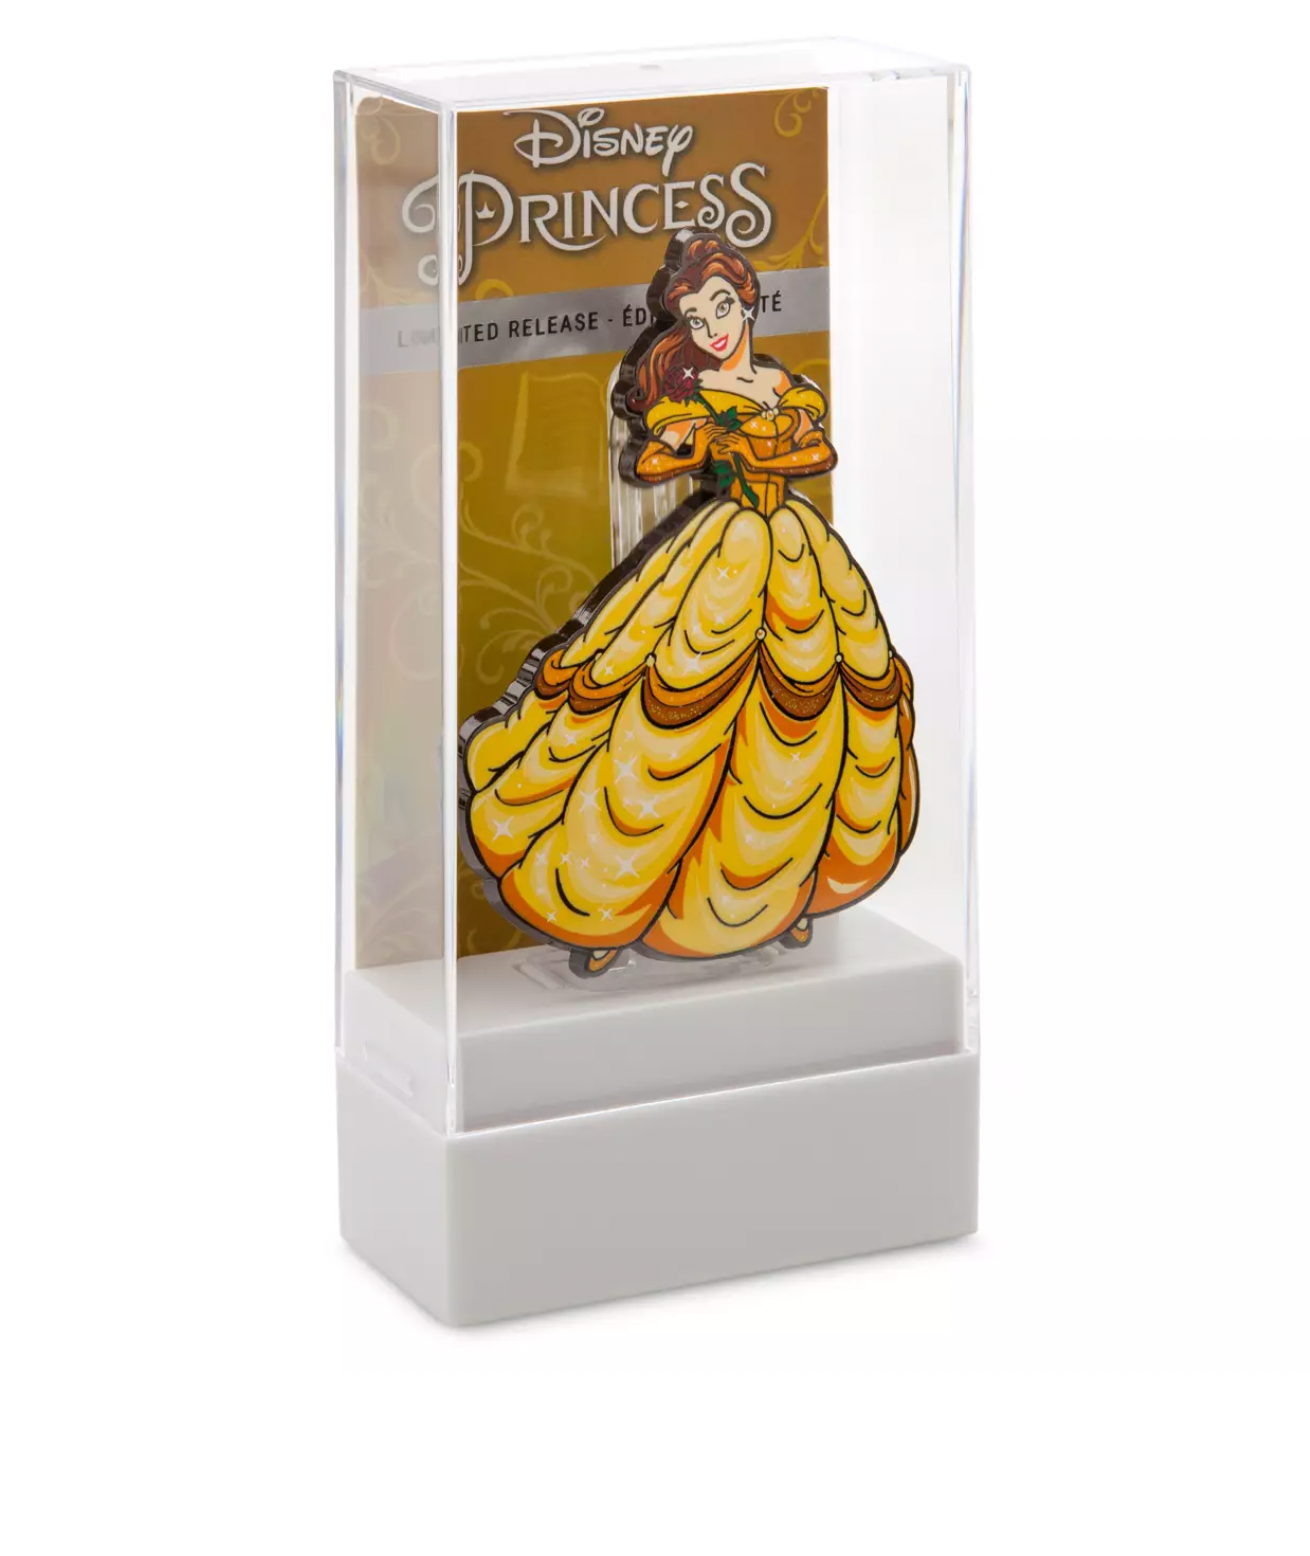 Disney Beauty and the Beast Belle FiGPiN Limited Pin New with Box